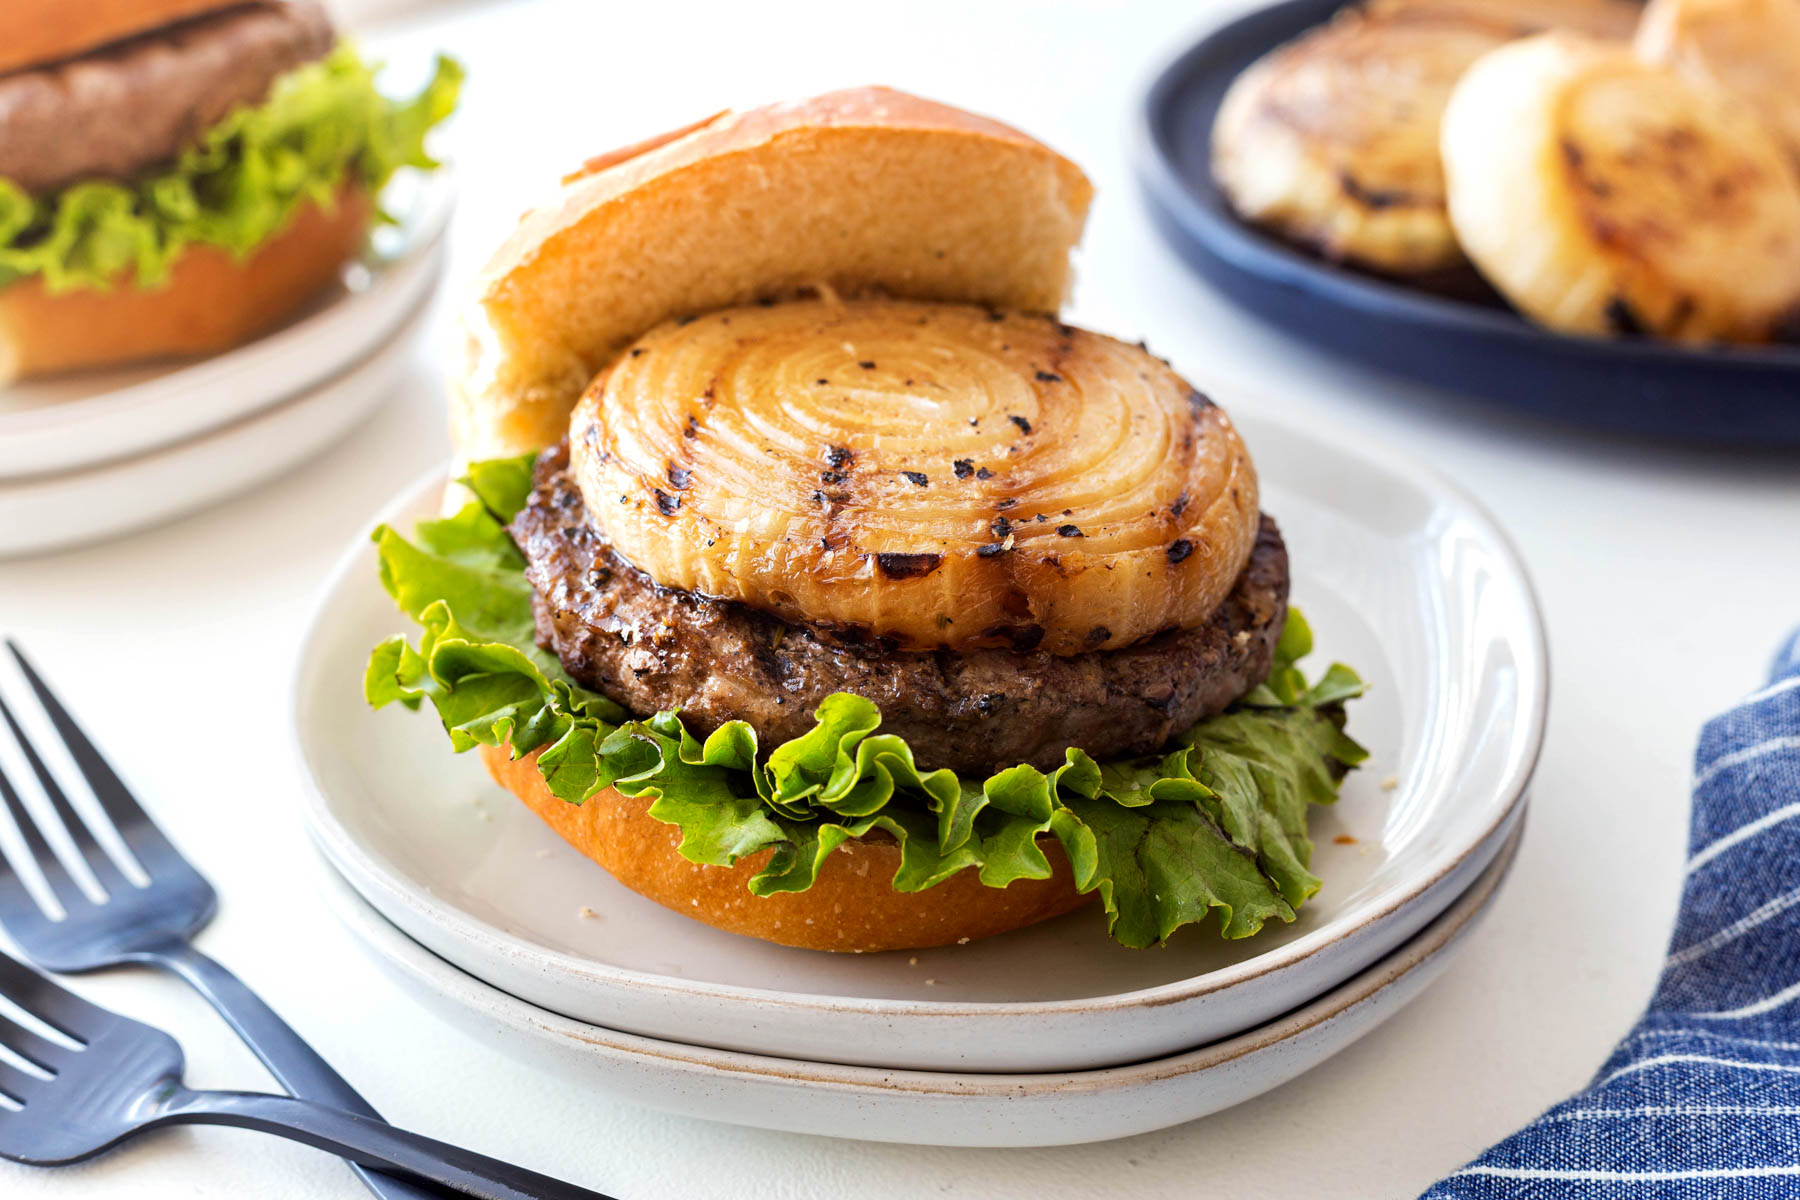 Mustard grilled onion on top of a hamburger sitting on a white plate with lettuce under the burger patty.